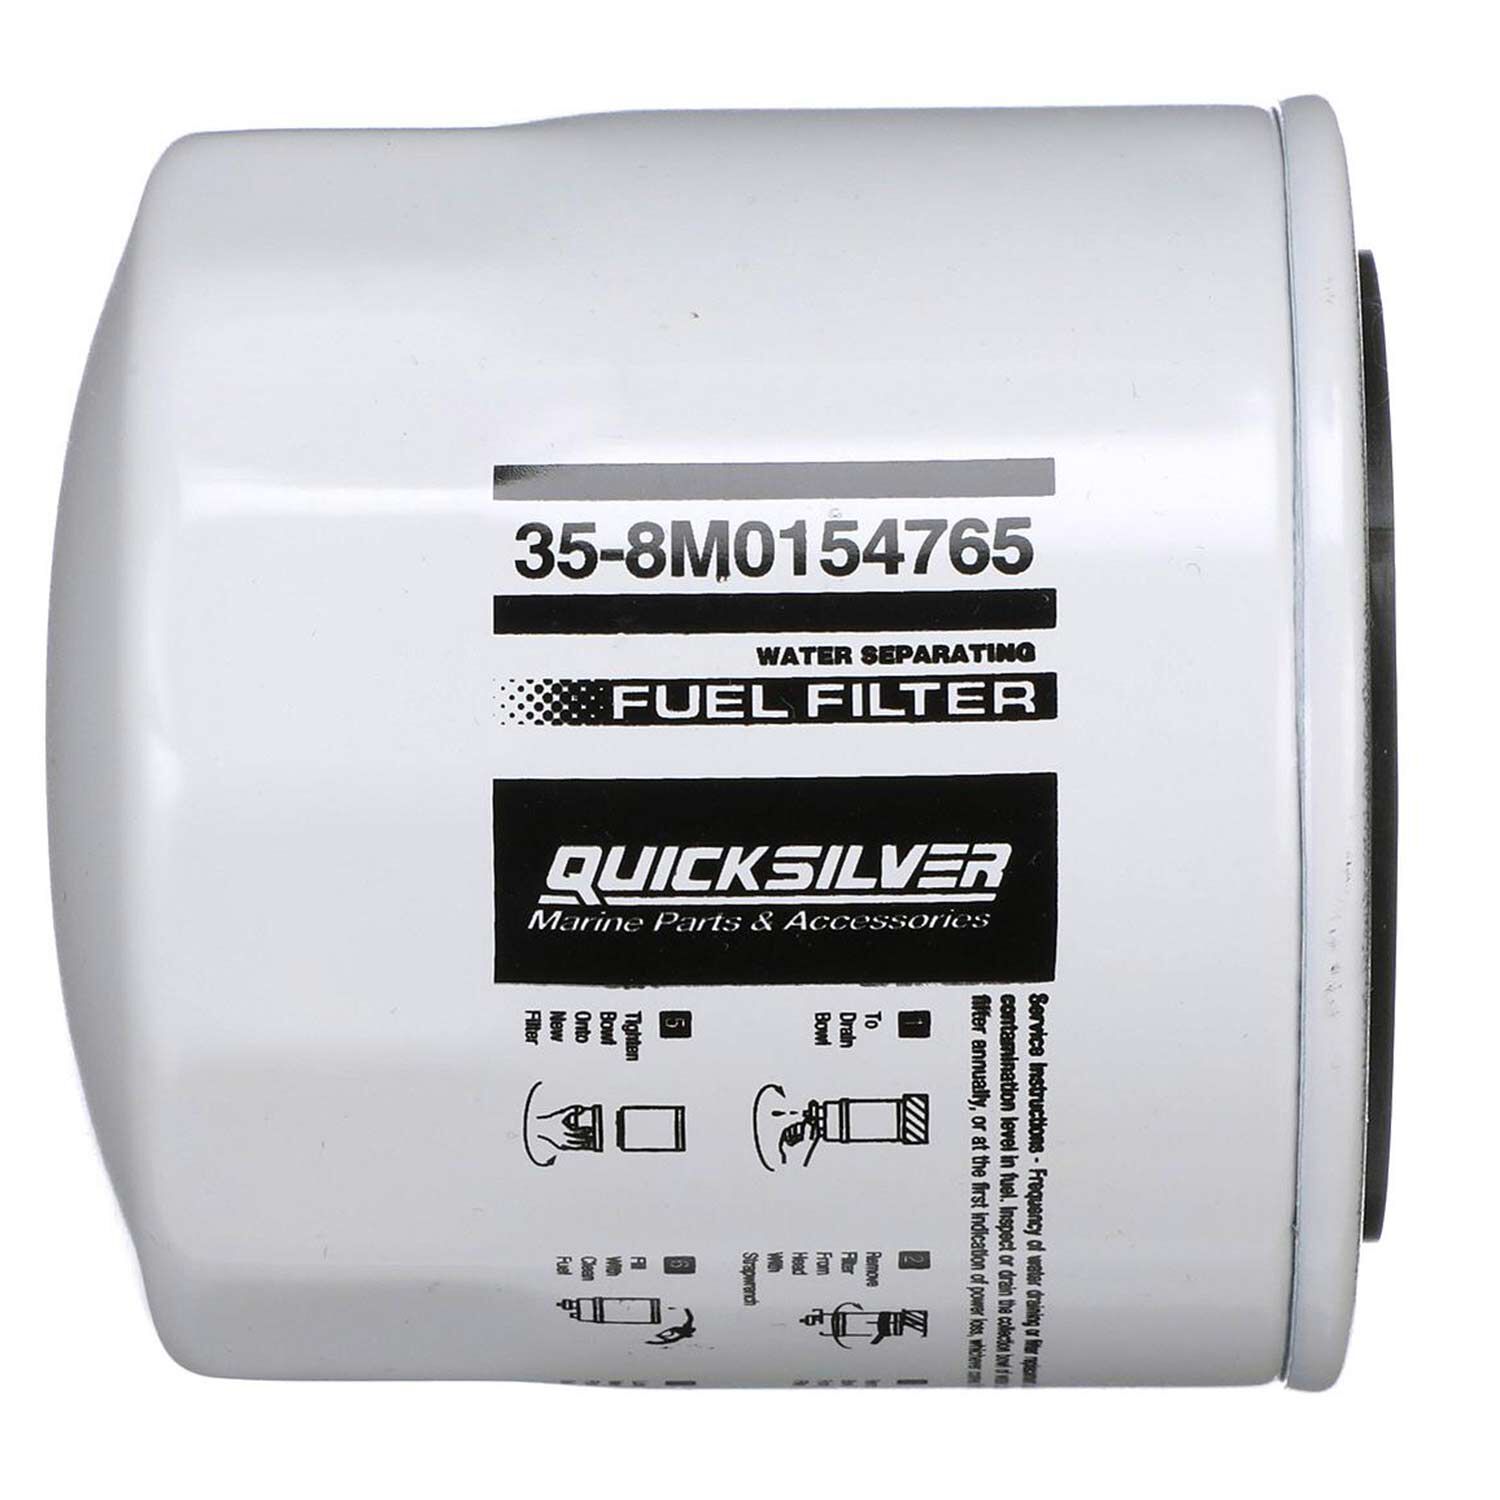 QUICKSILVER 8M0154765 Water Separating Fuel Filter for Various